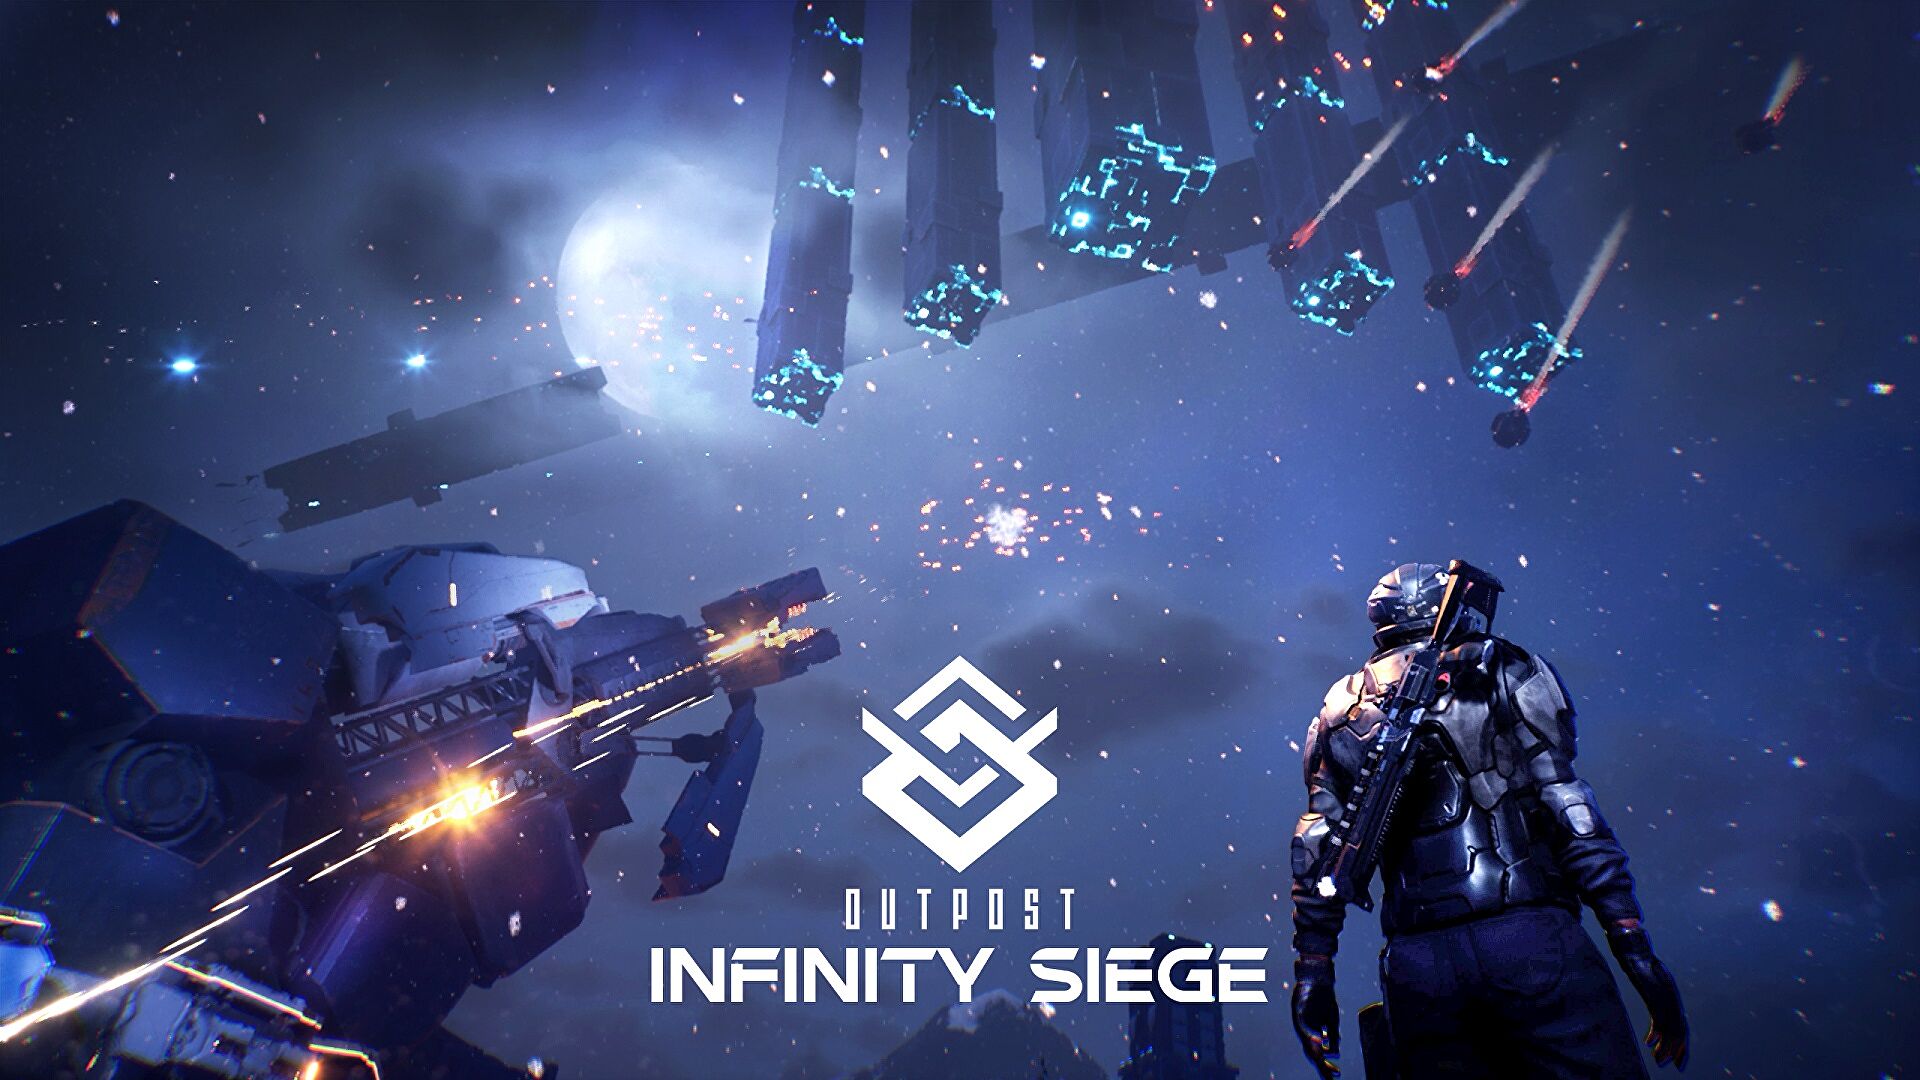 4 ways Outpost: Infinity Siege is shaking up the co-op Survival FPS